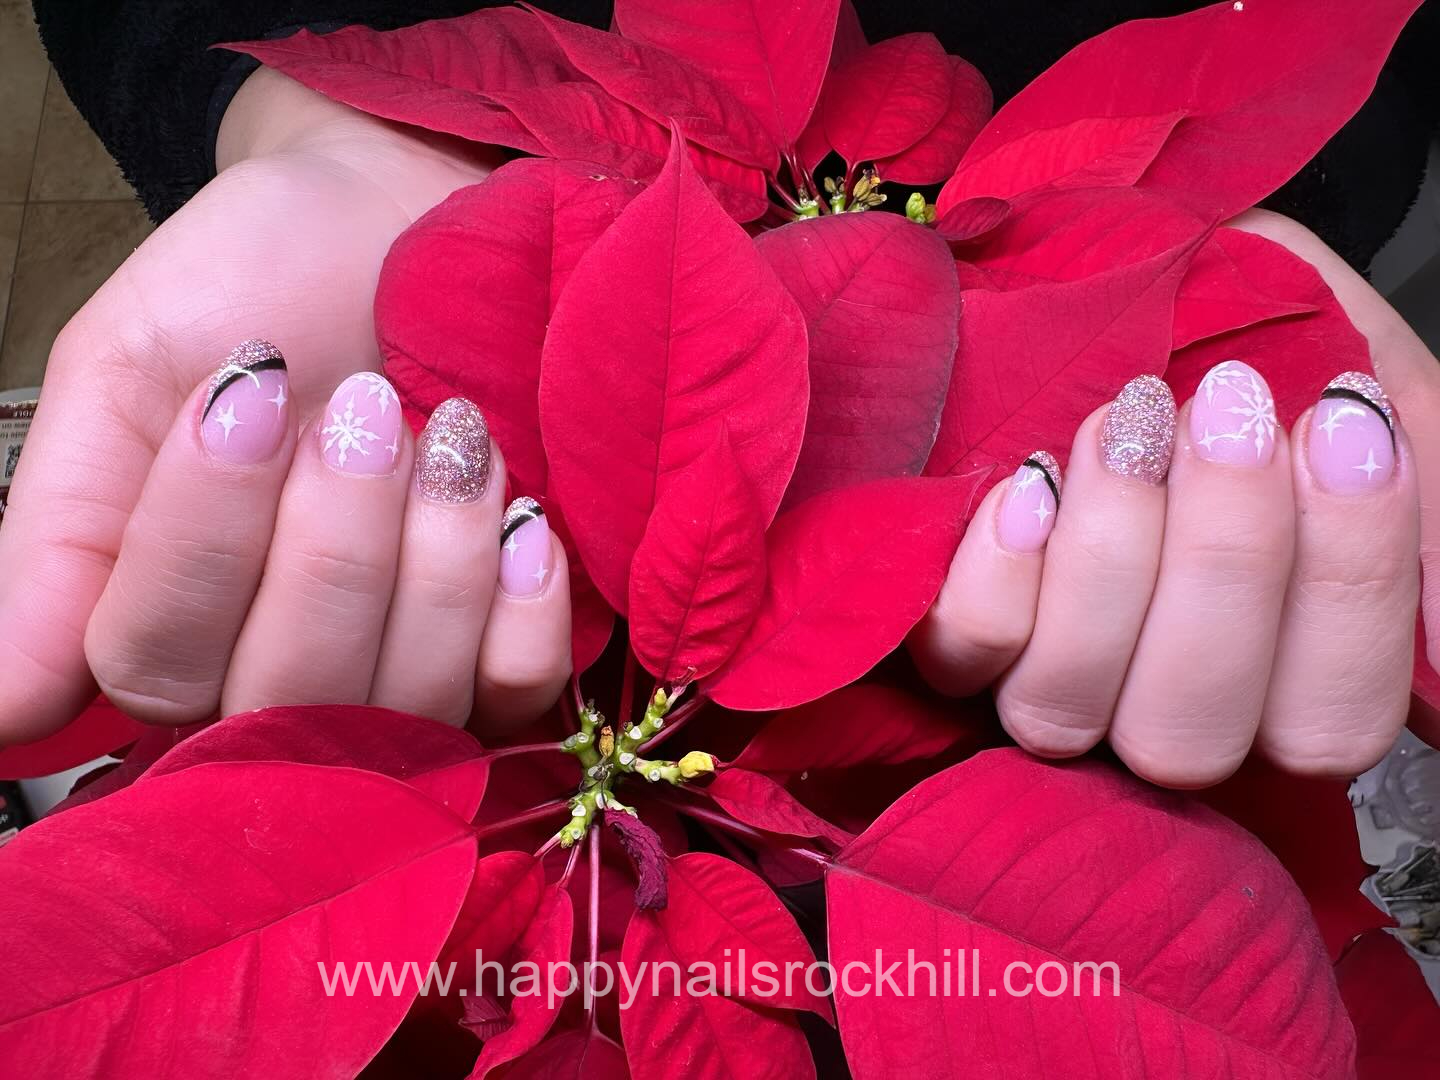 2. Sparkly Holiday Nail Art Ideas - wide 4